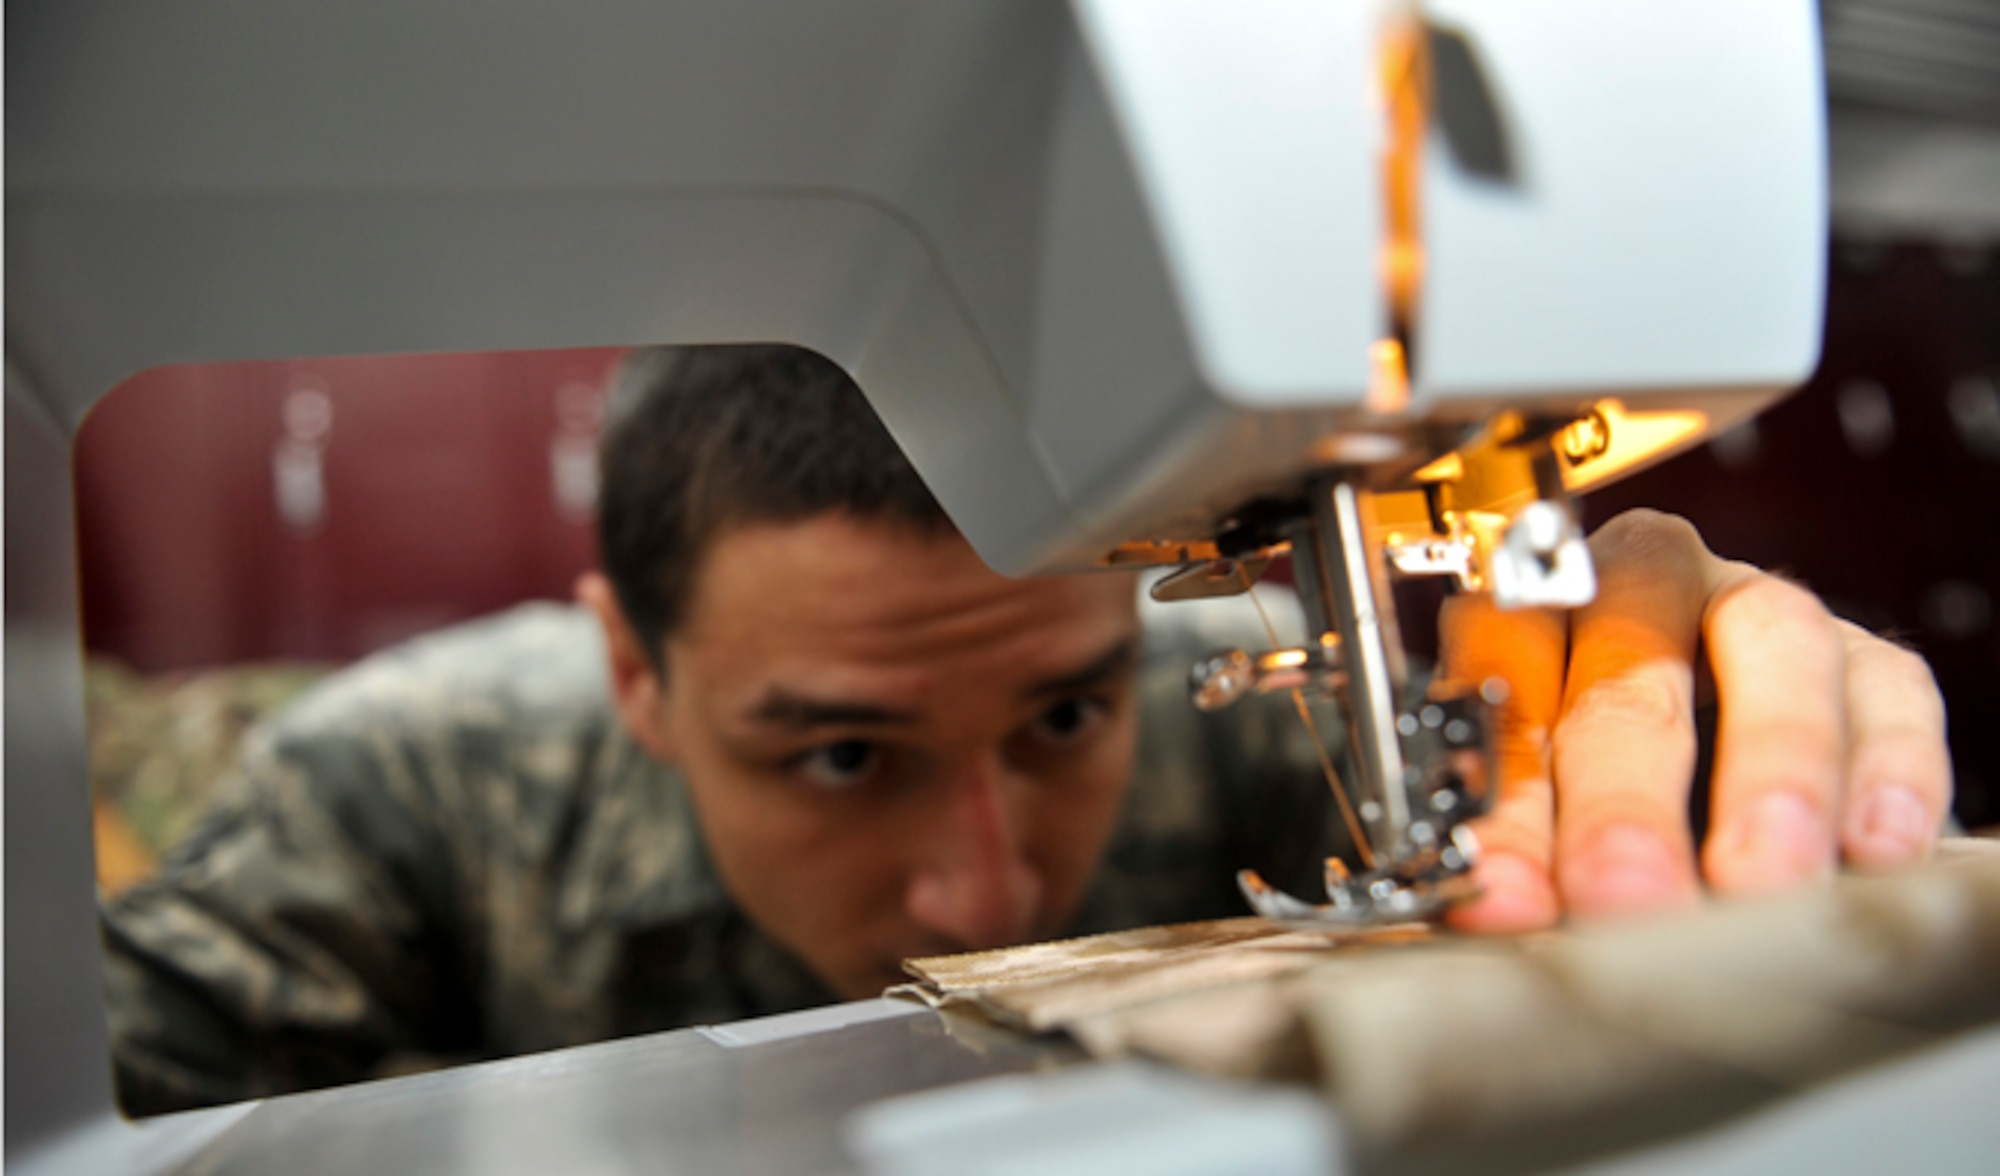 Senior Airman Devin Litton uses a sewing machine, July 18, 2014, at McConnell Air Force Base, Kan. Sewing is one of several skills an aircrew flight equipment Airmen must master to repair life rafts and other emergency tools. Litton is a 22nd Operations Support Squadron aircrew flight equipment journeyman. (U.S. Air Force photo/Airman 1st Class John Linzmeier) 